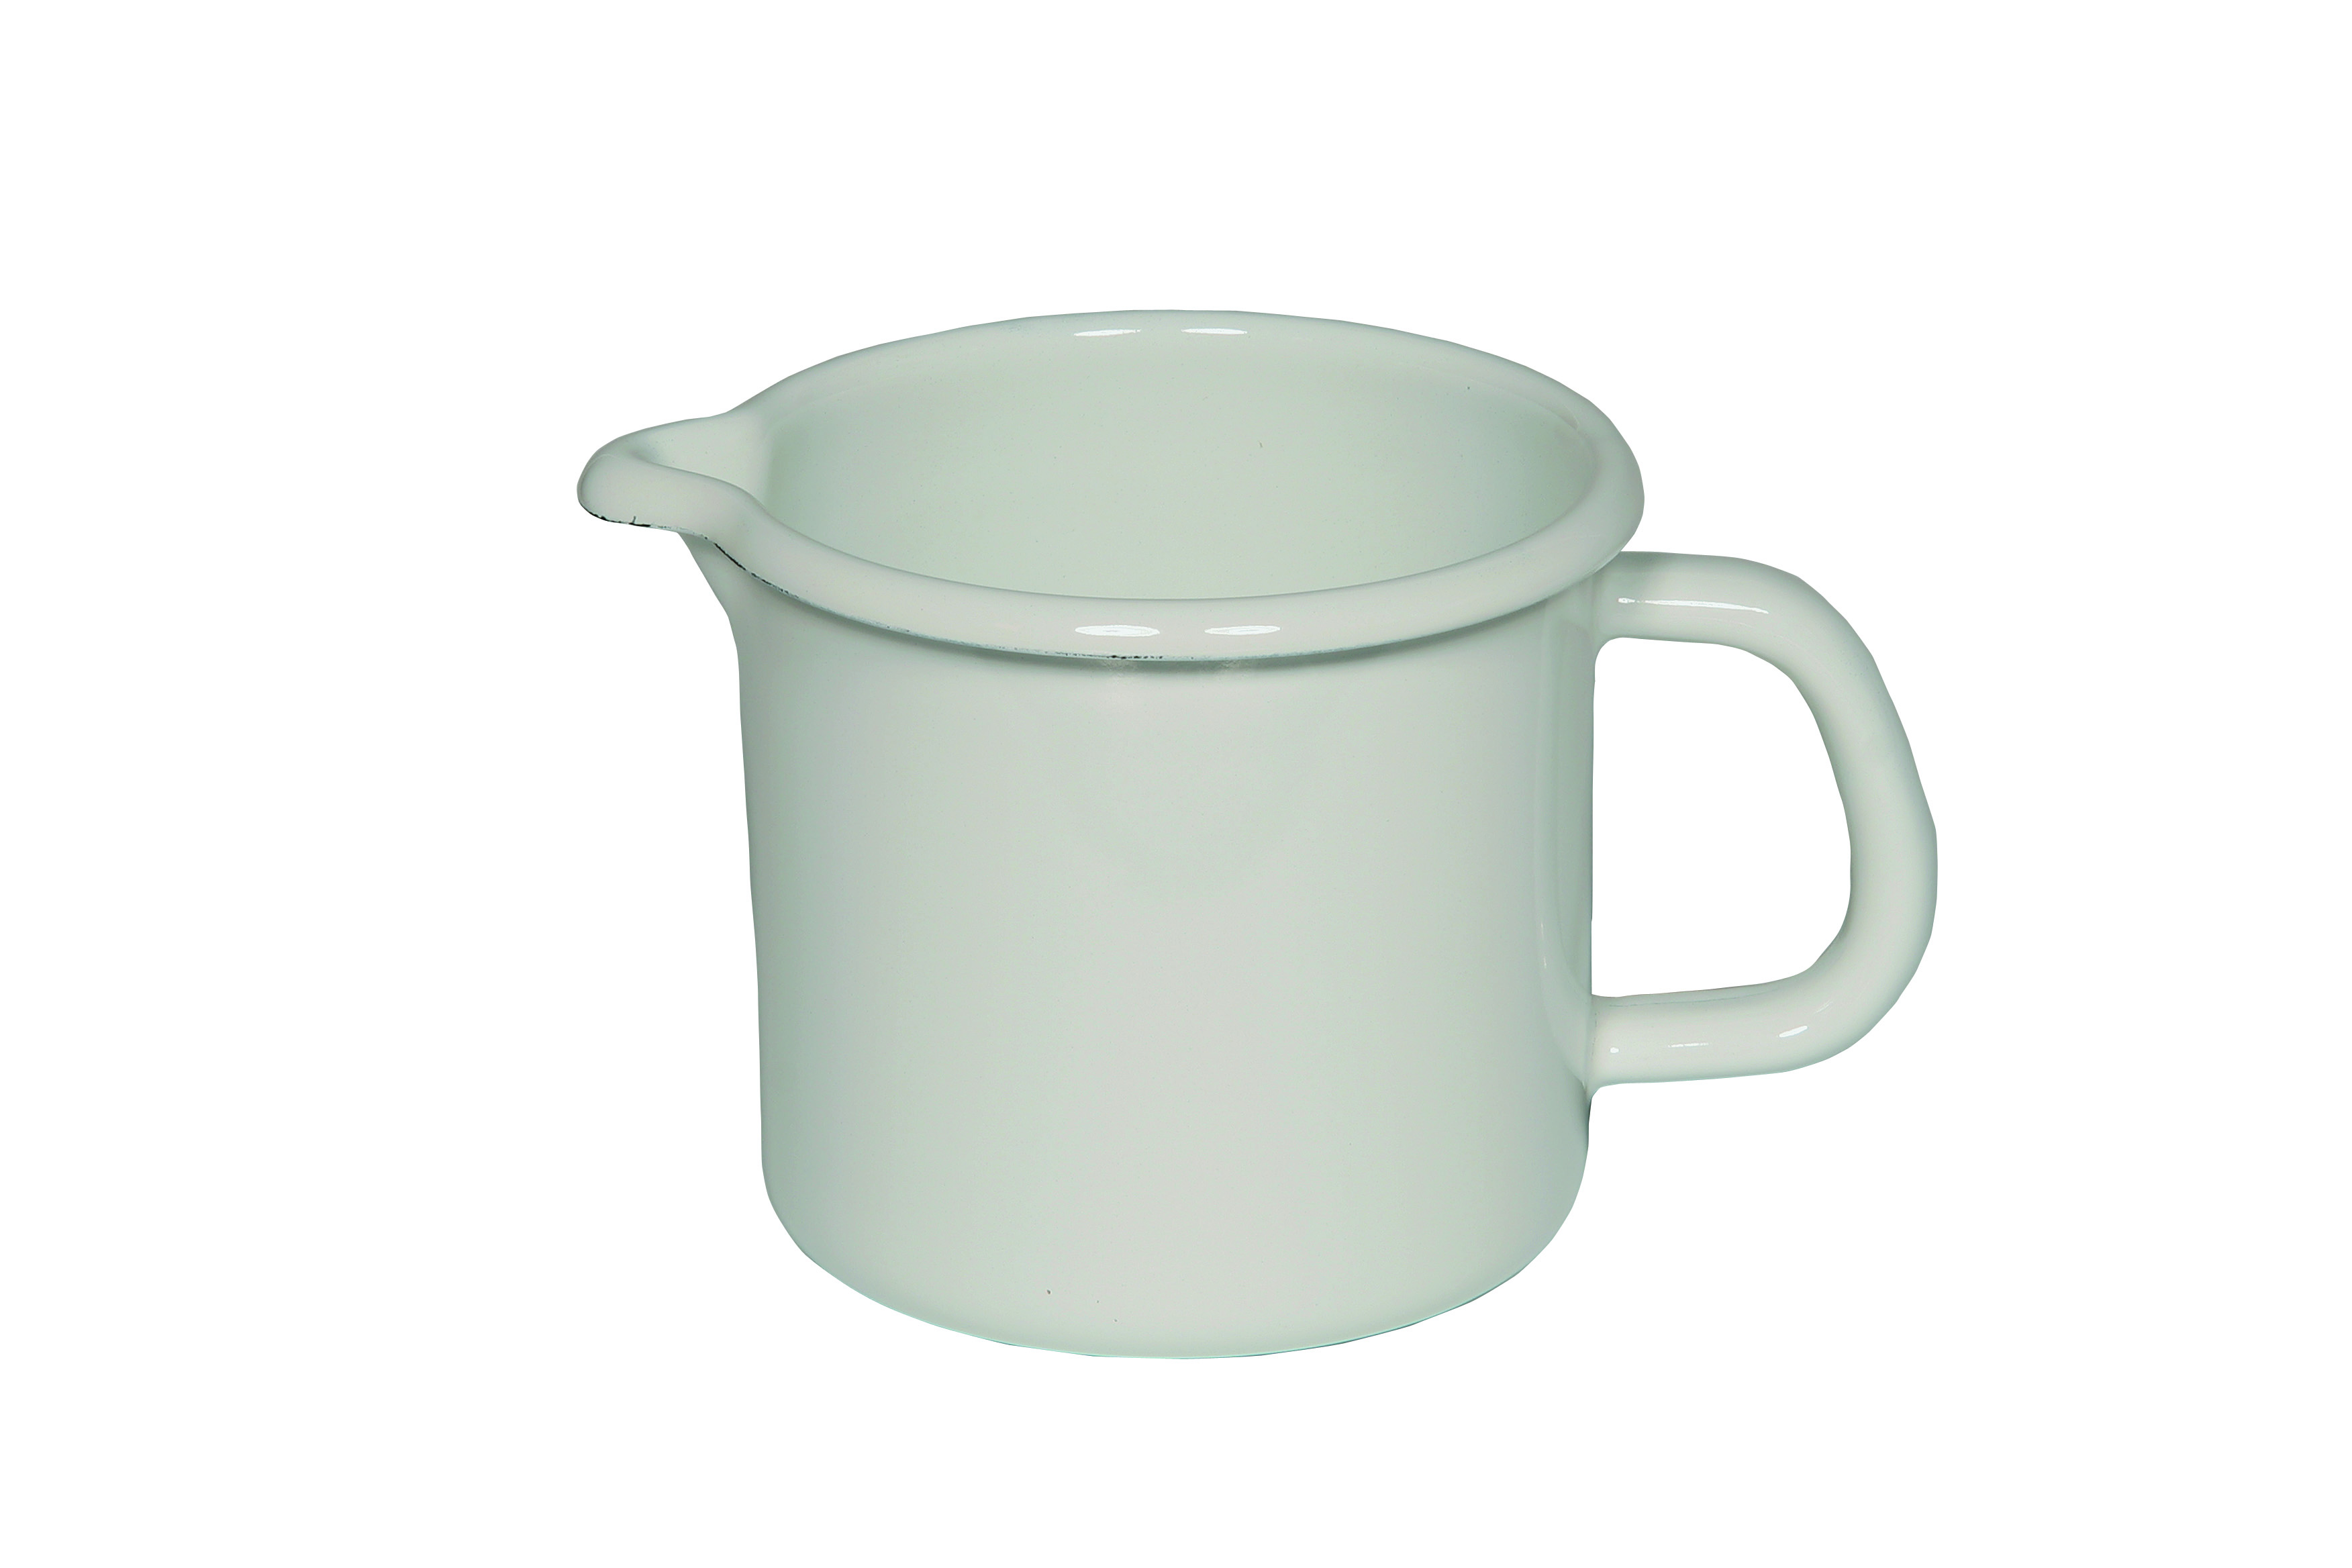 Riess Classic Weiß Schnabeltopf 9 cm / 0,5 Ltr / aus Emaille